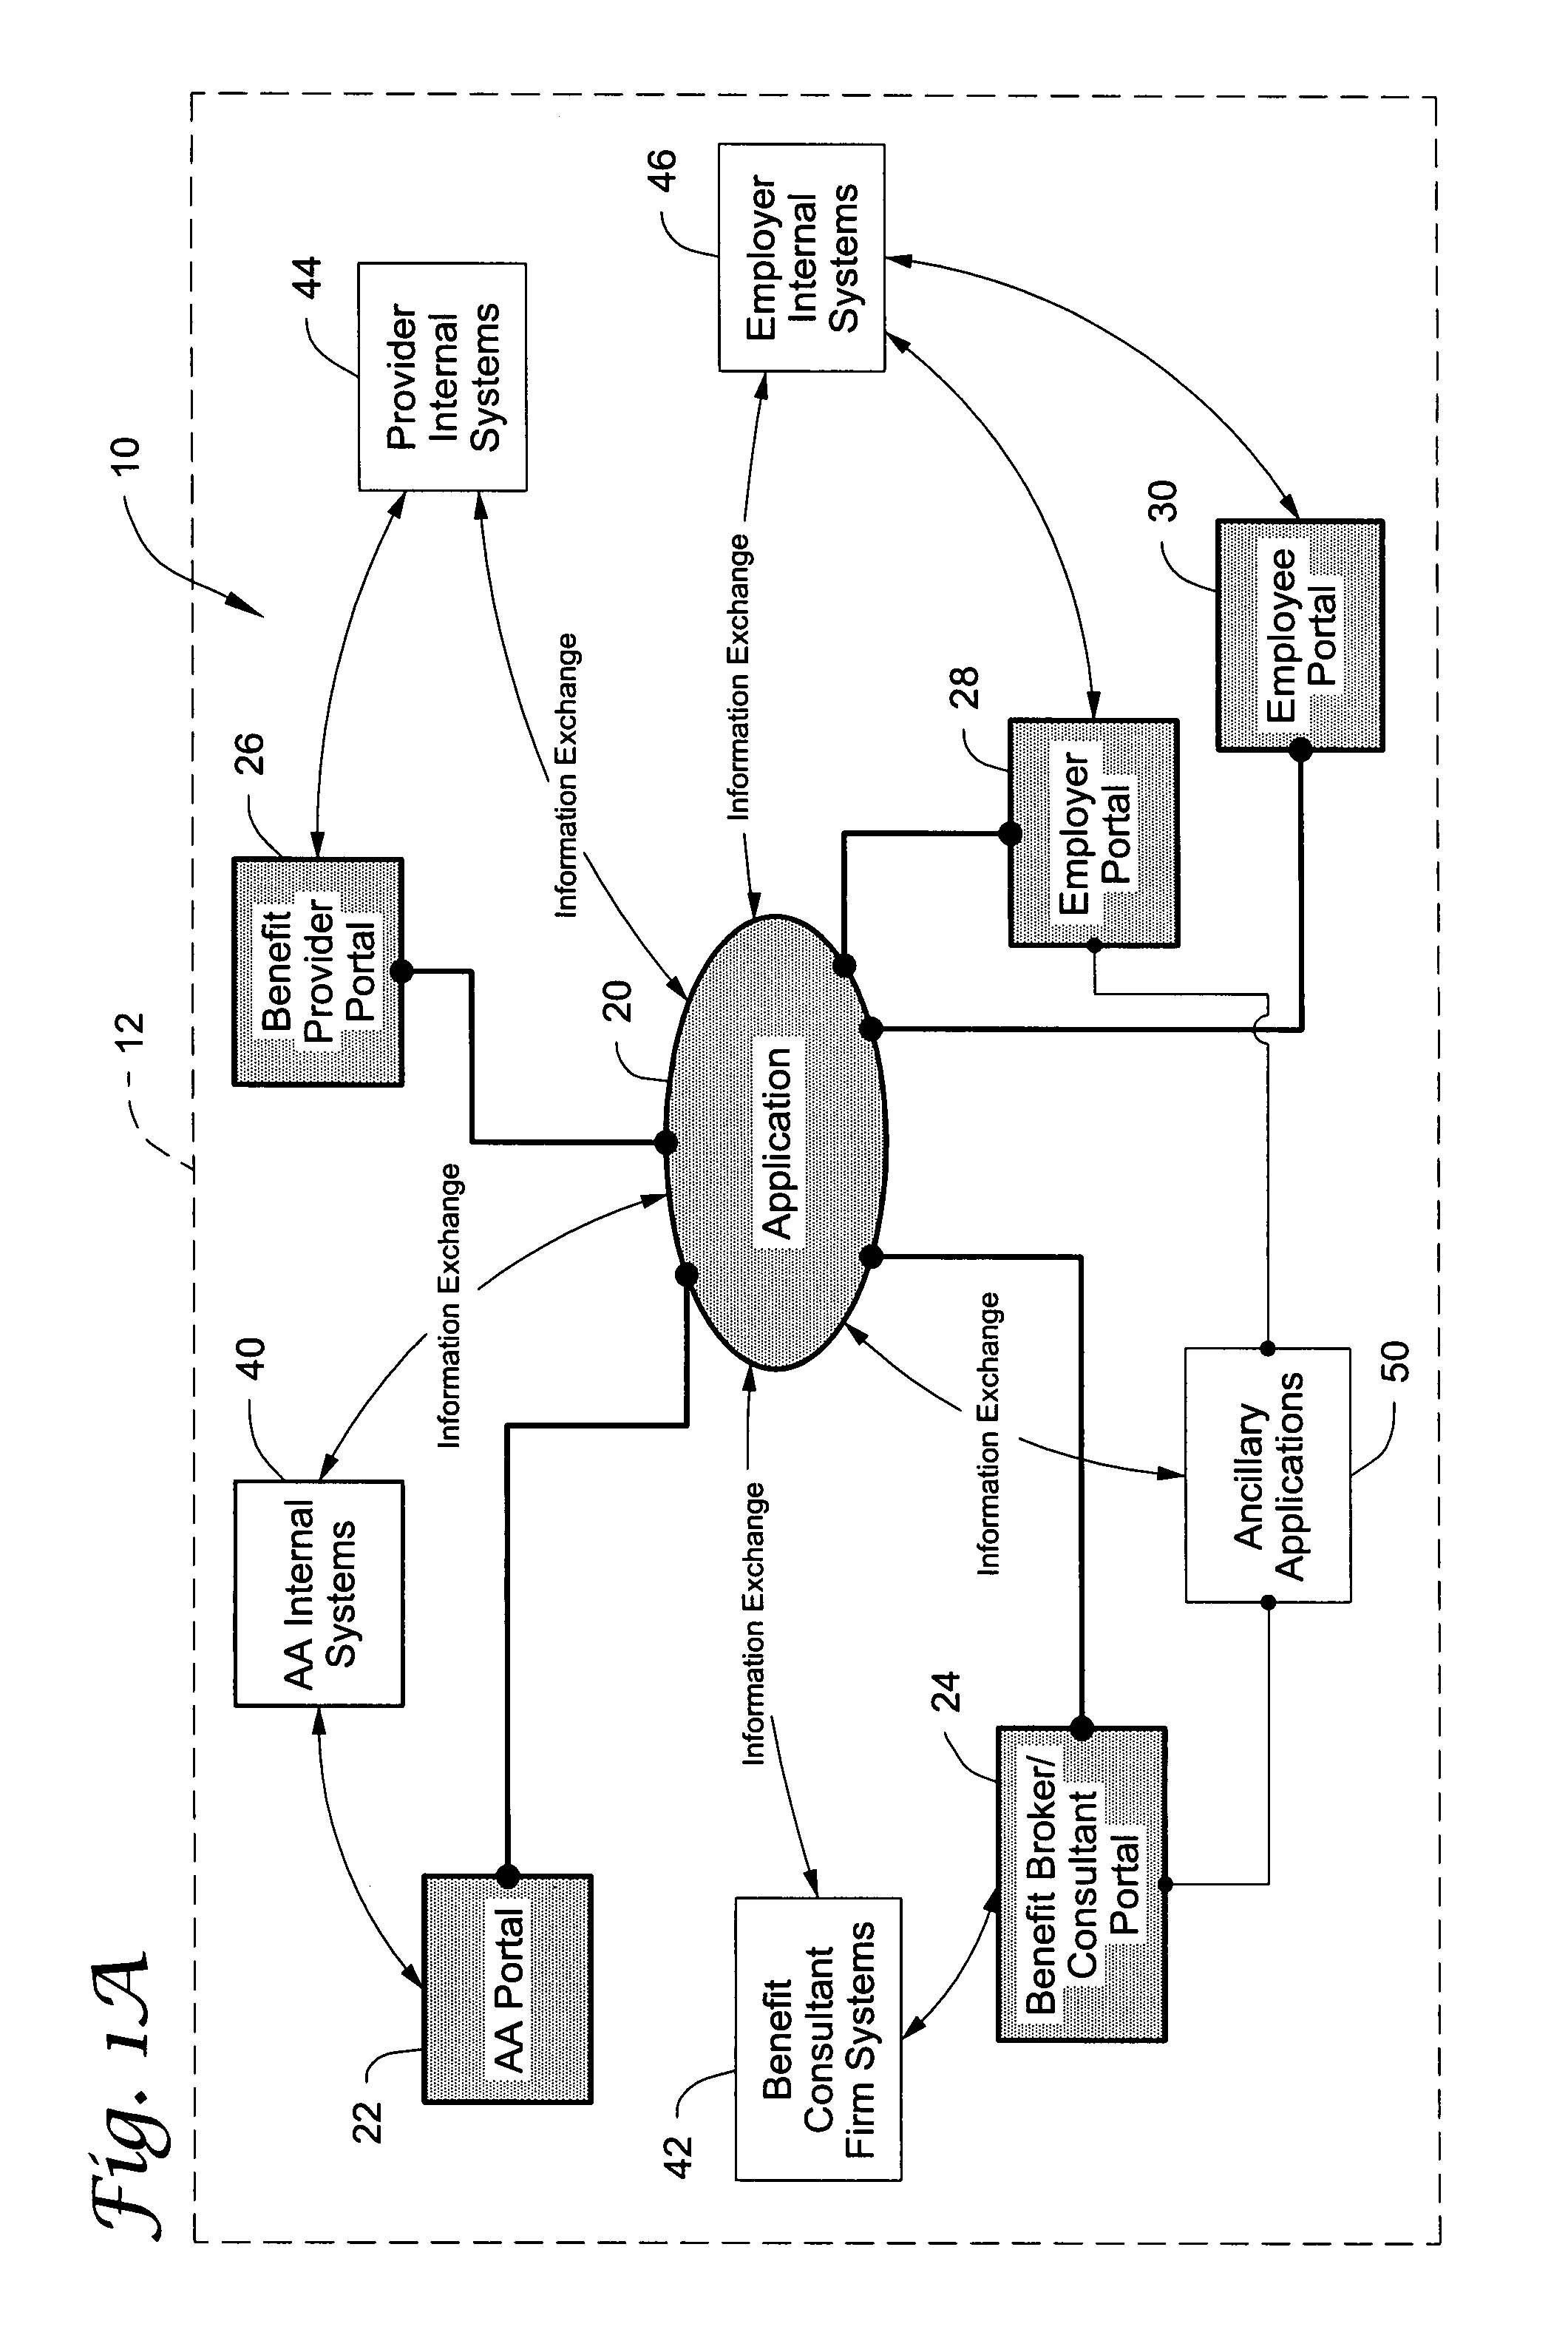 Benefit management system and method